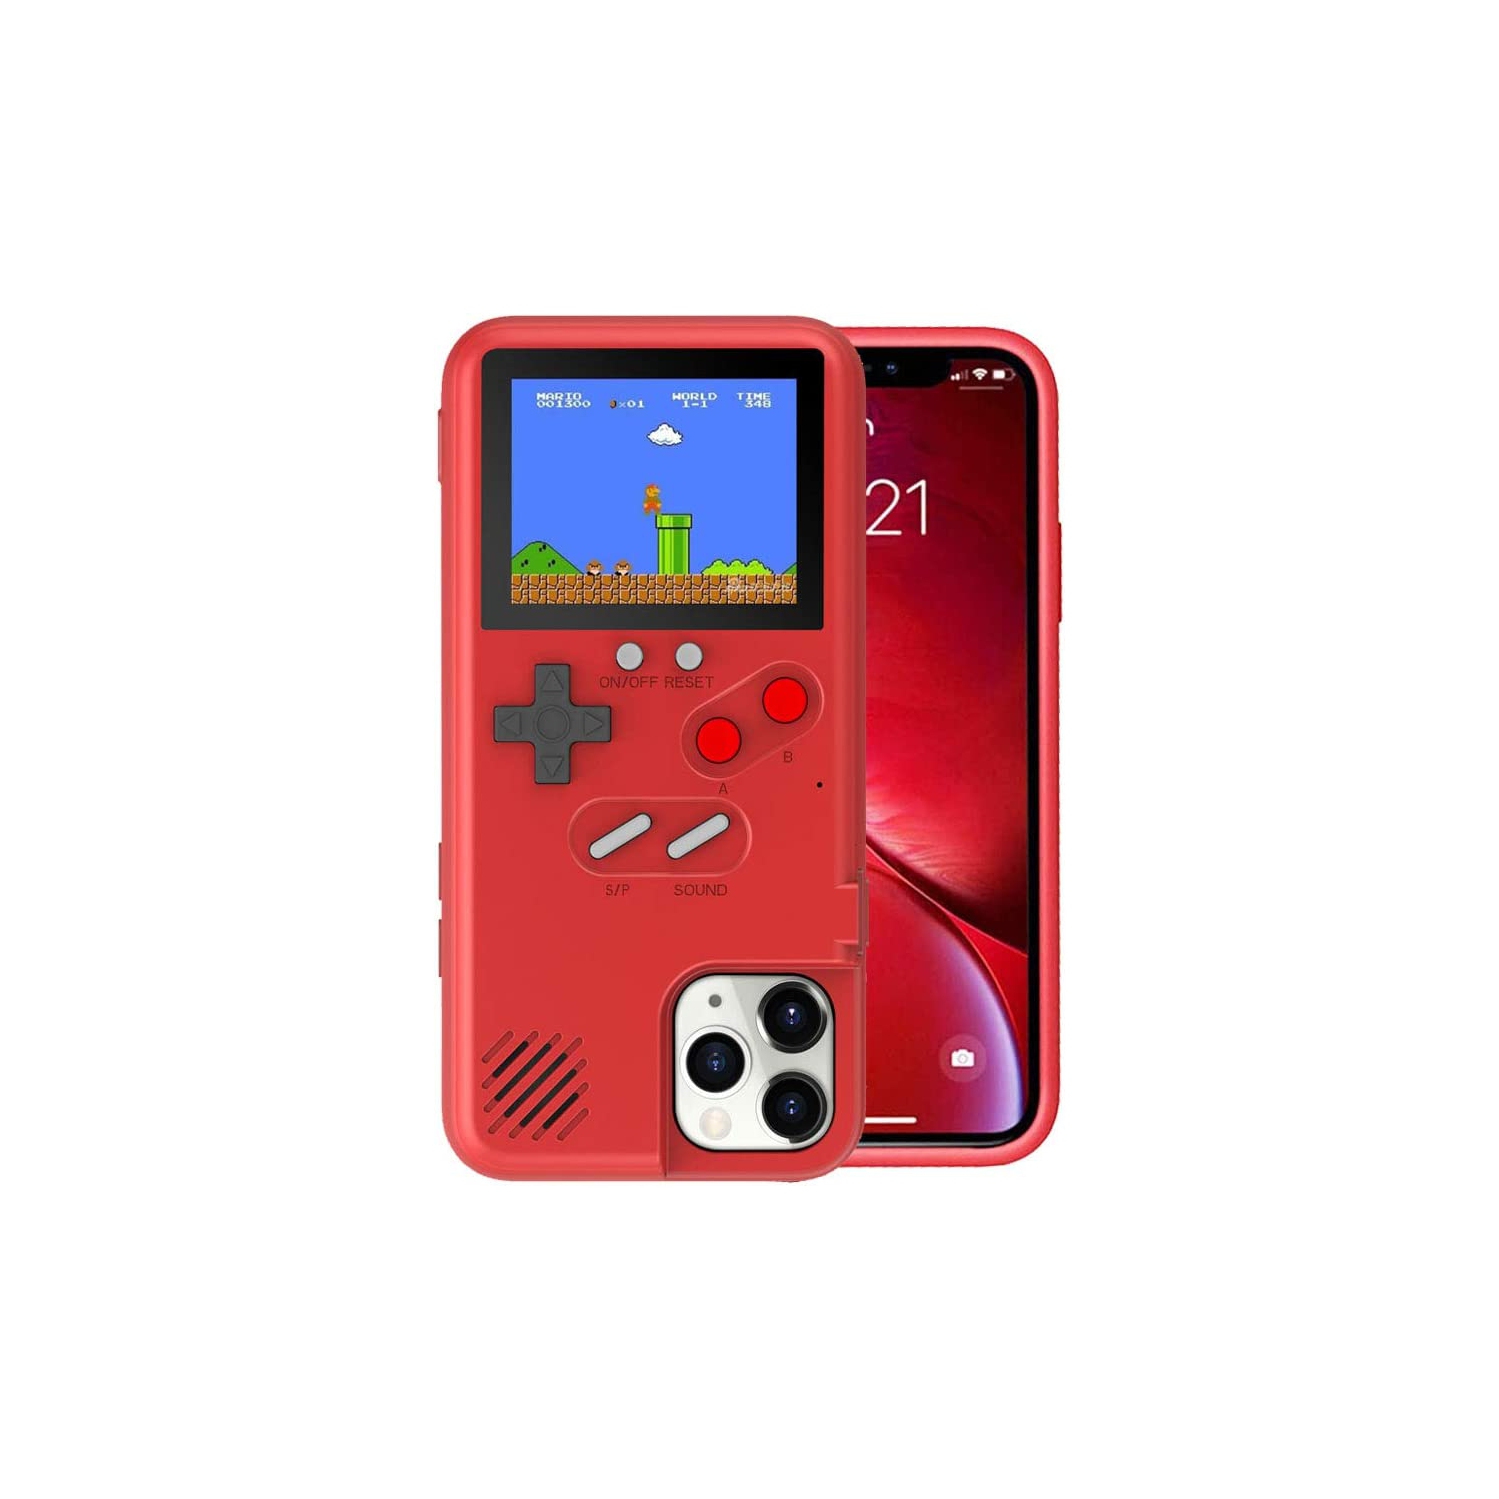 Game Console Case for iPhone 8, Shockproof Case with Video Games for iPhone 7, Color Display Retro Gameboy Case, Game Phone Case for iPhone 6/6S/7/8, Red